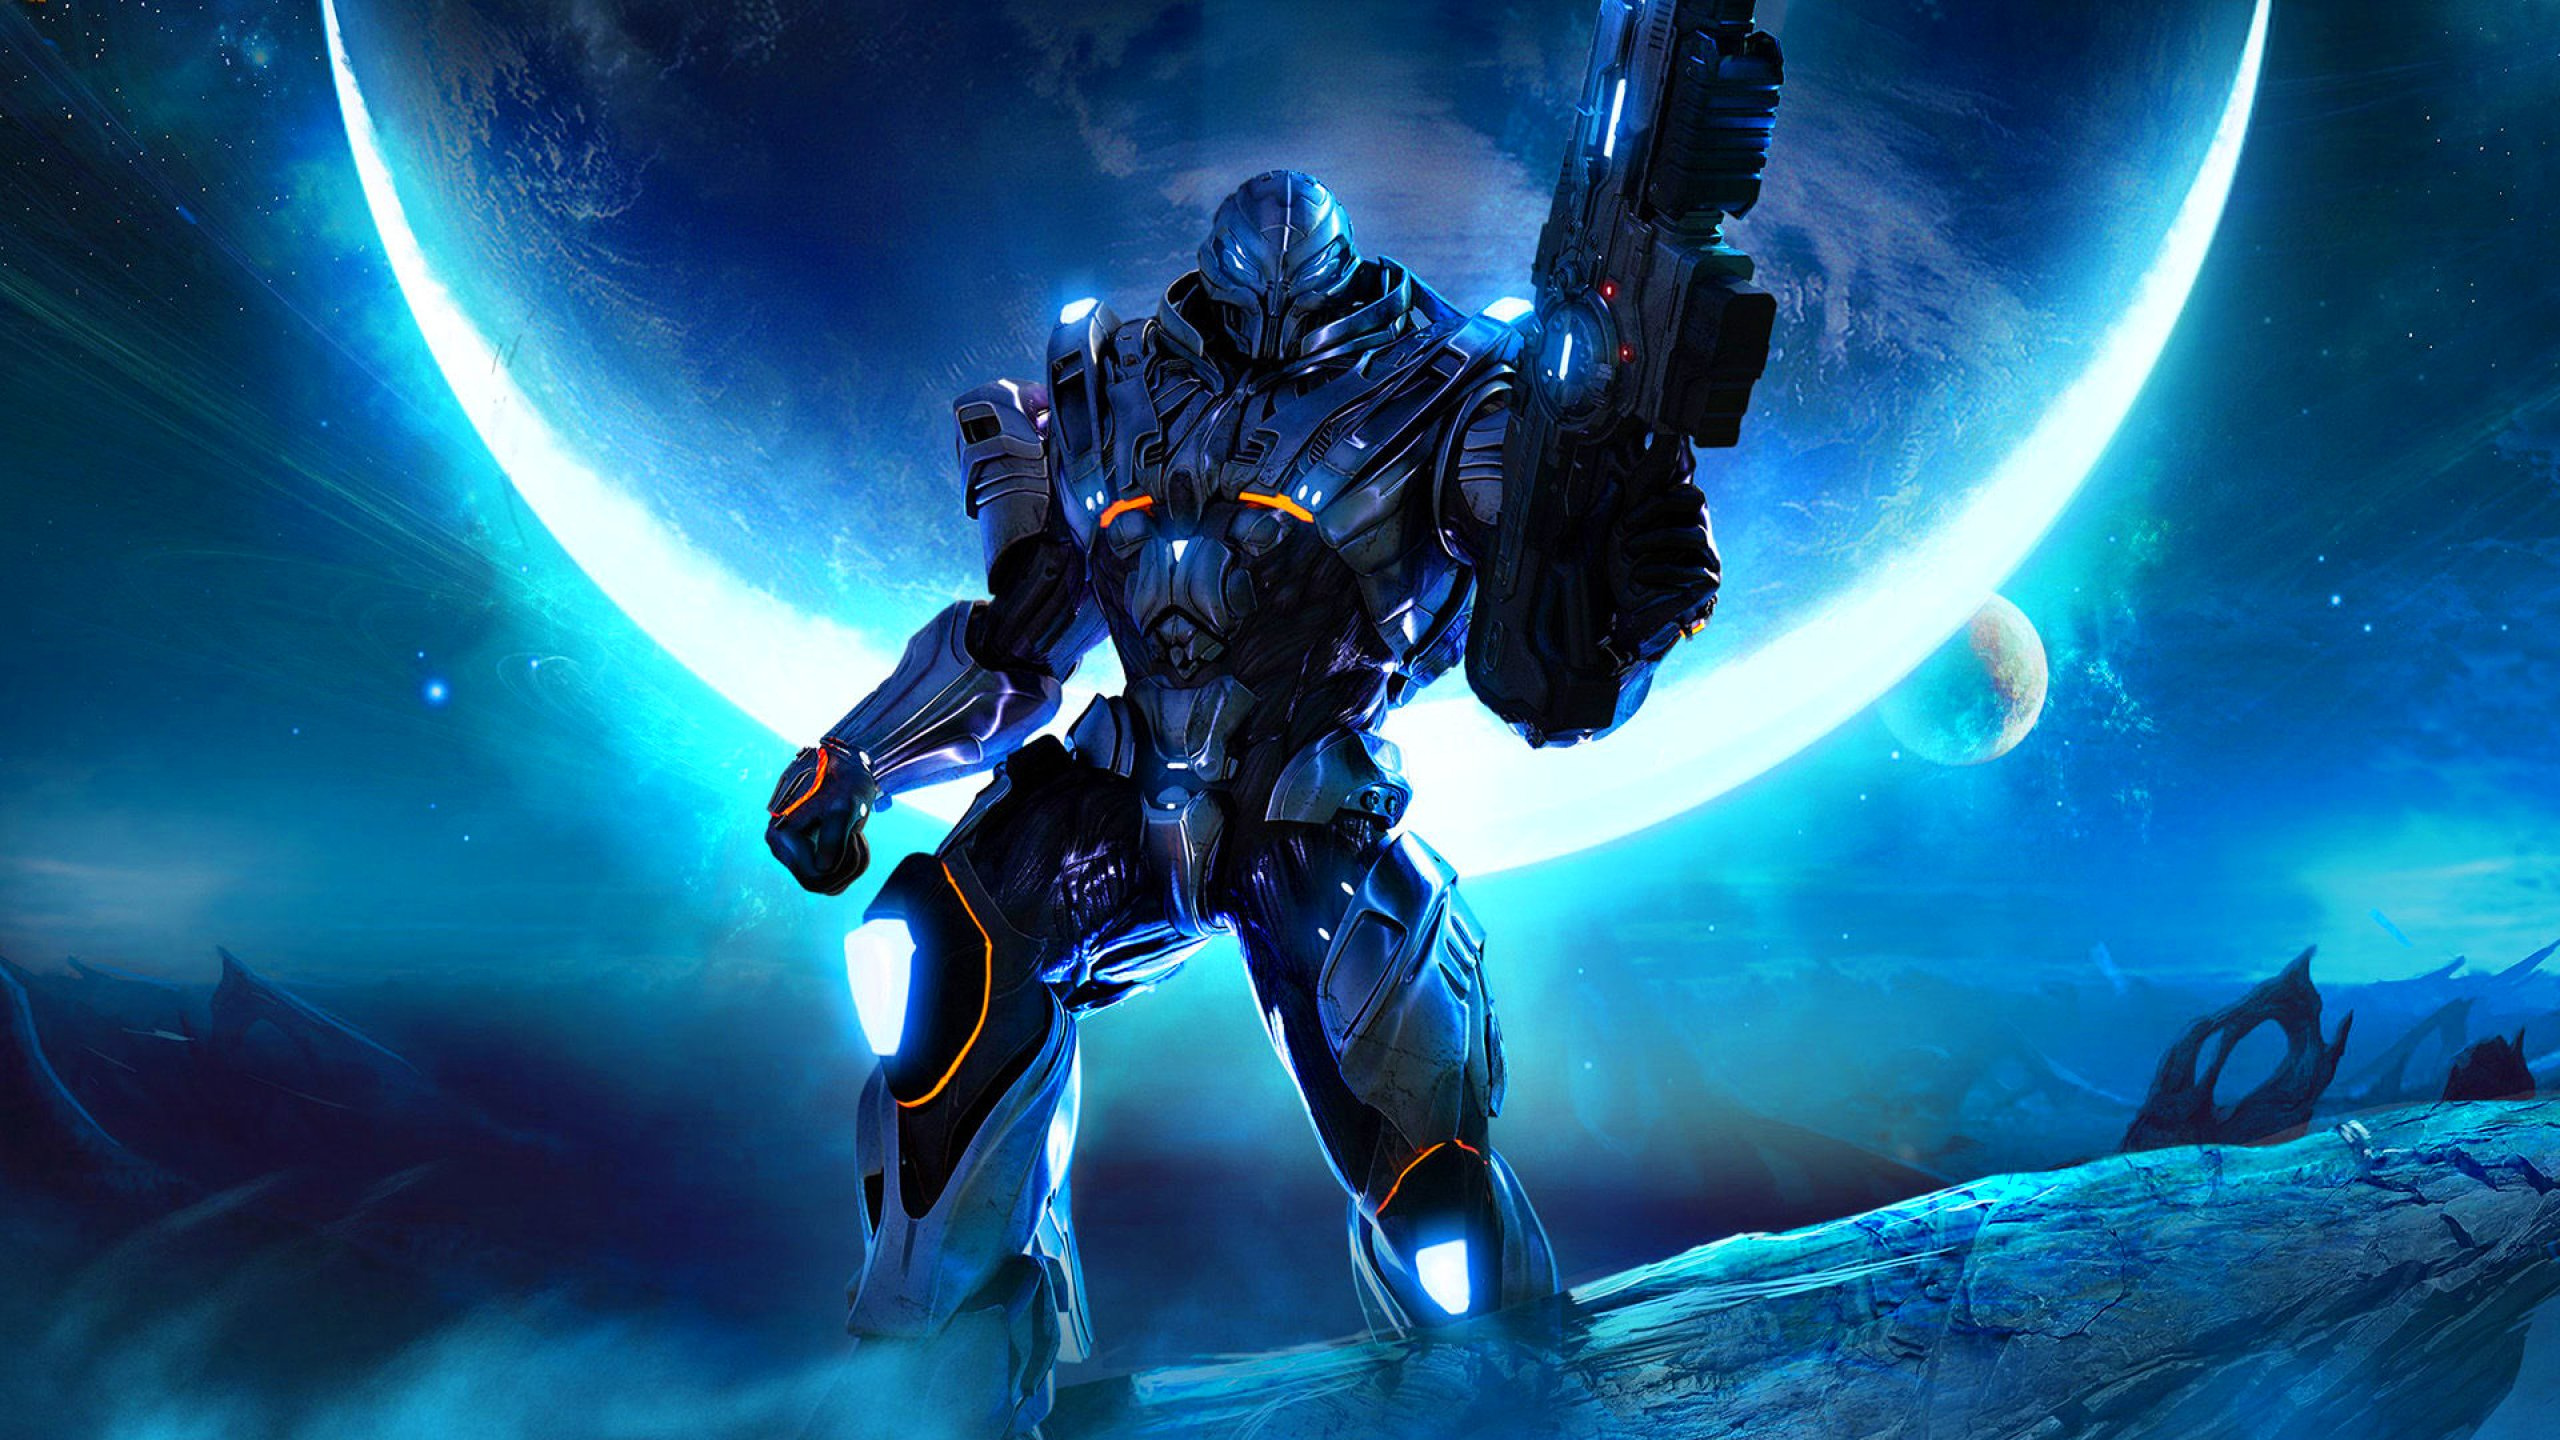 Mecha, Space, pc Game, Power Armor Video Games, Extreme Sport. Wallpaper in 2560x1440 Resolution